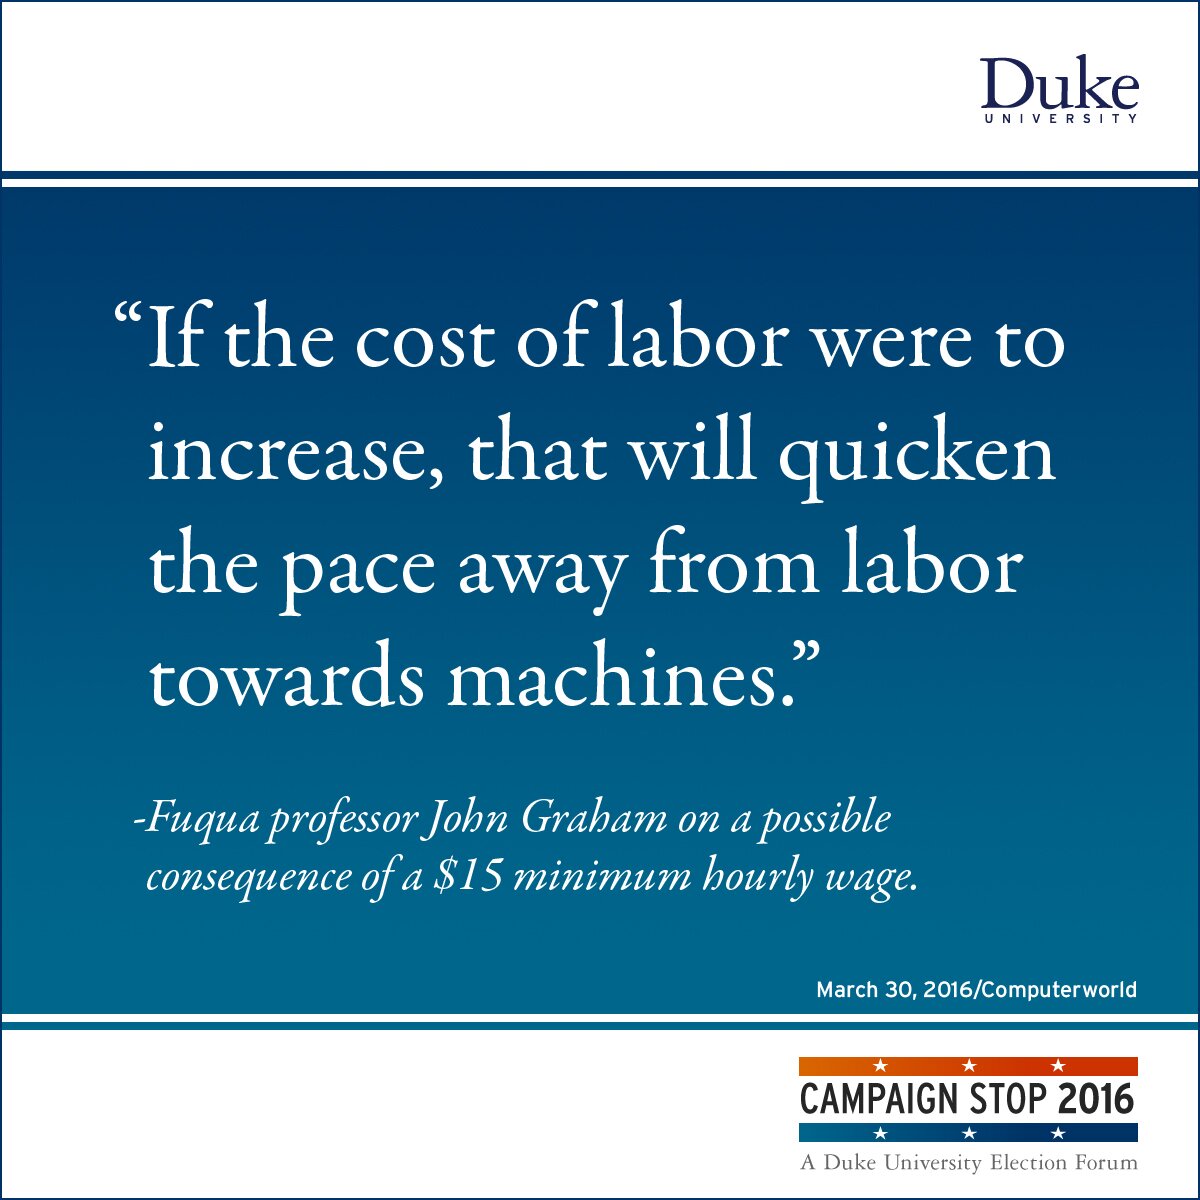 “If the cost of labor were to increase, that will quicken the pace away from labor towards machines.” -Fuqua professor John Graham on a possible consequence of a $15 minimum hourly wage.